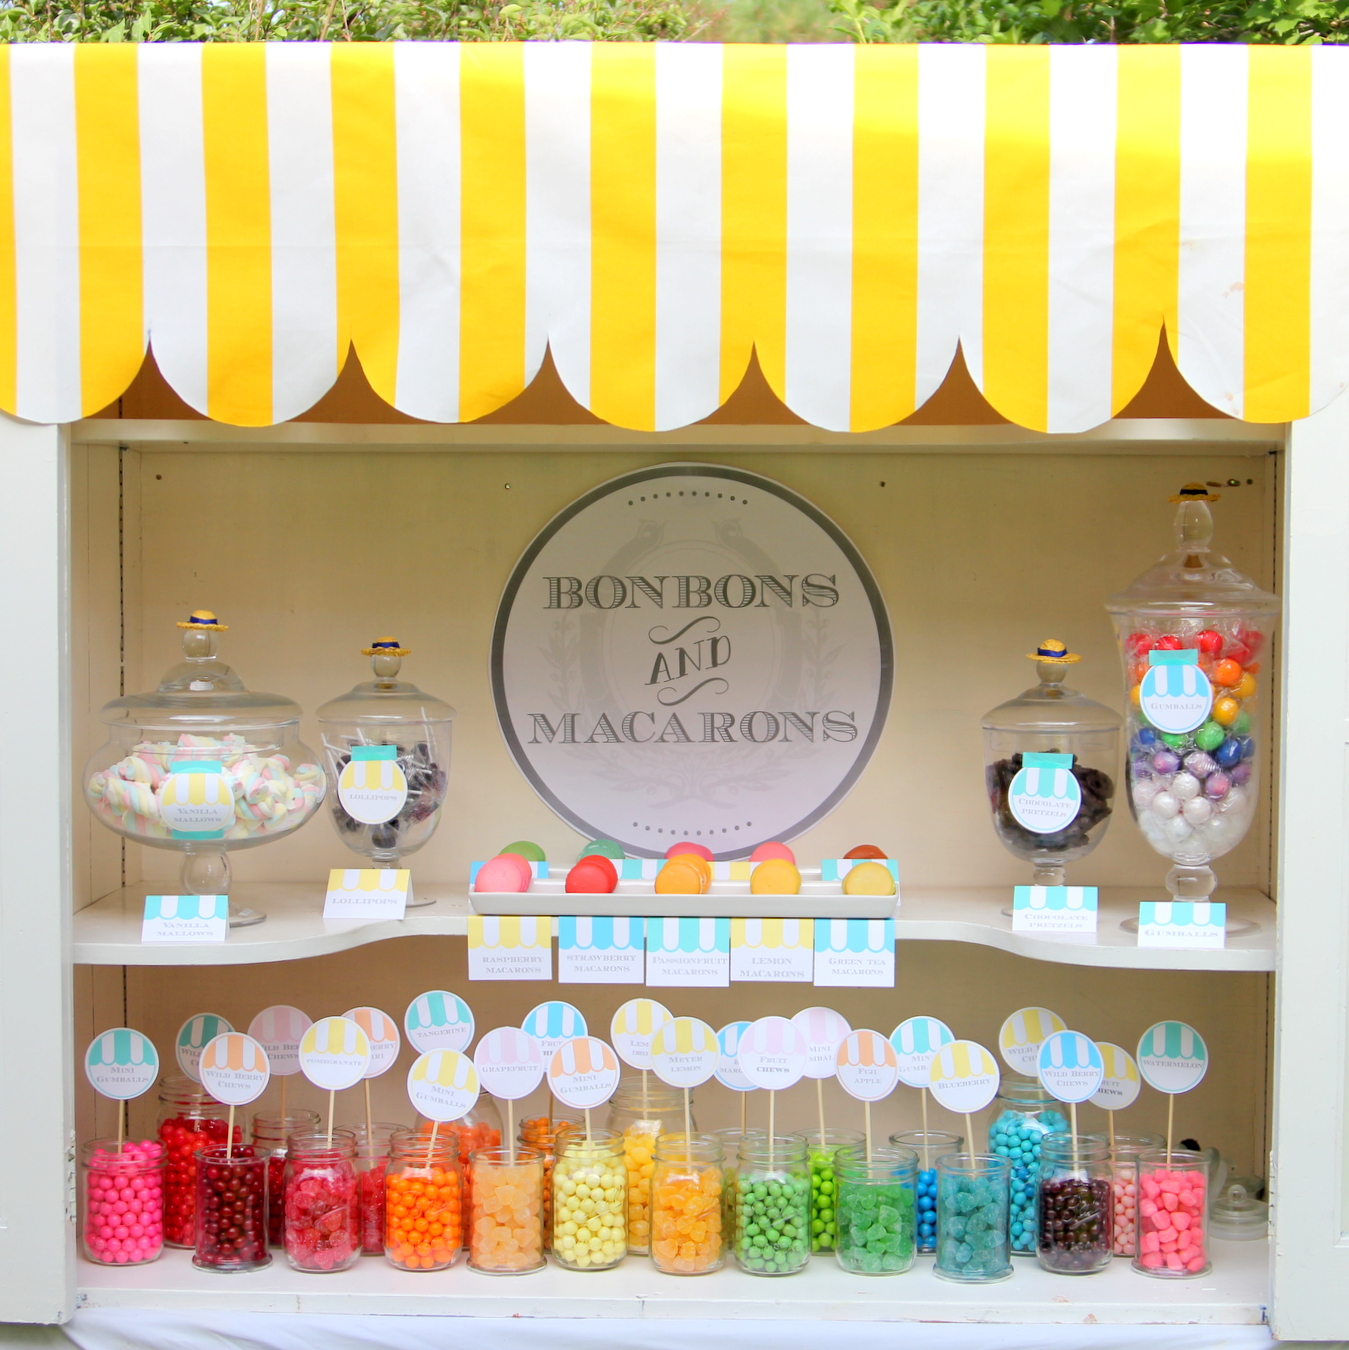 the very sweetest sweet shoppe (at a little girl's birthday party)